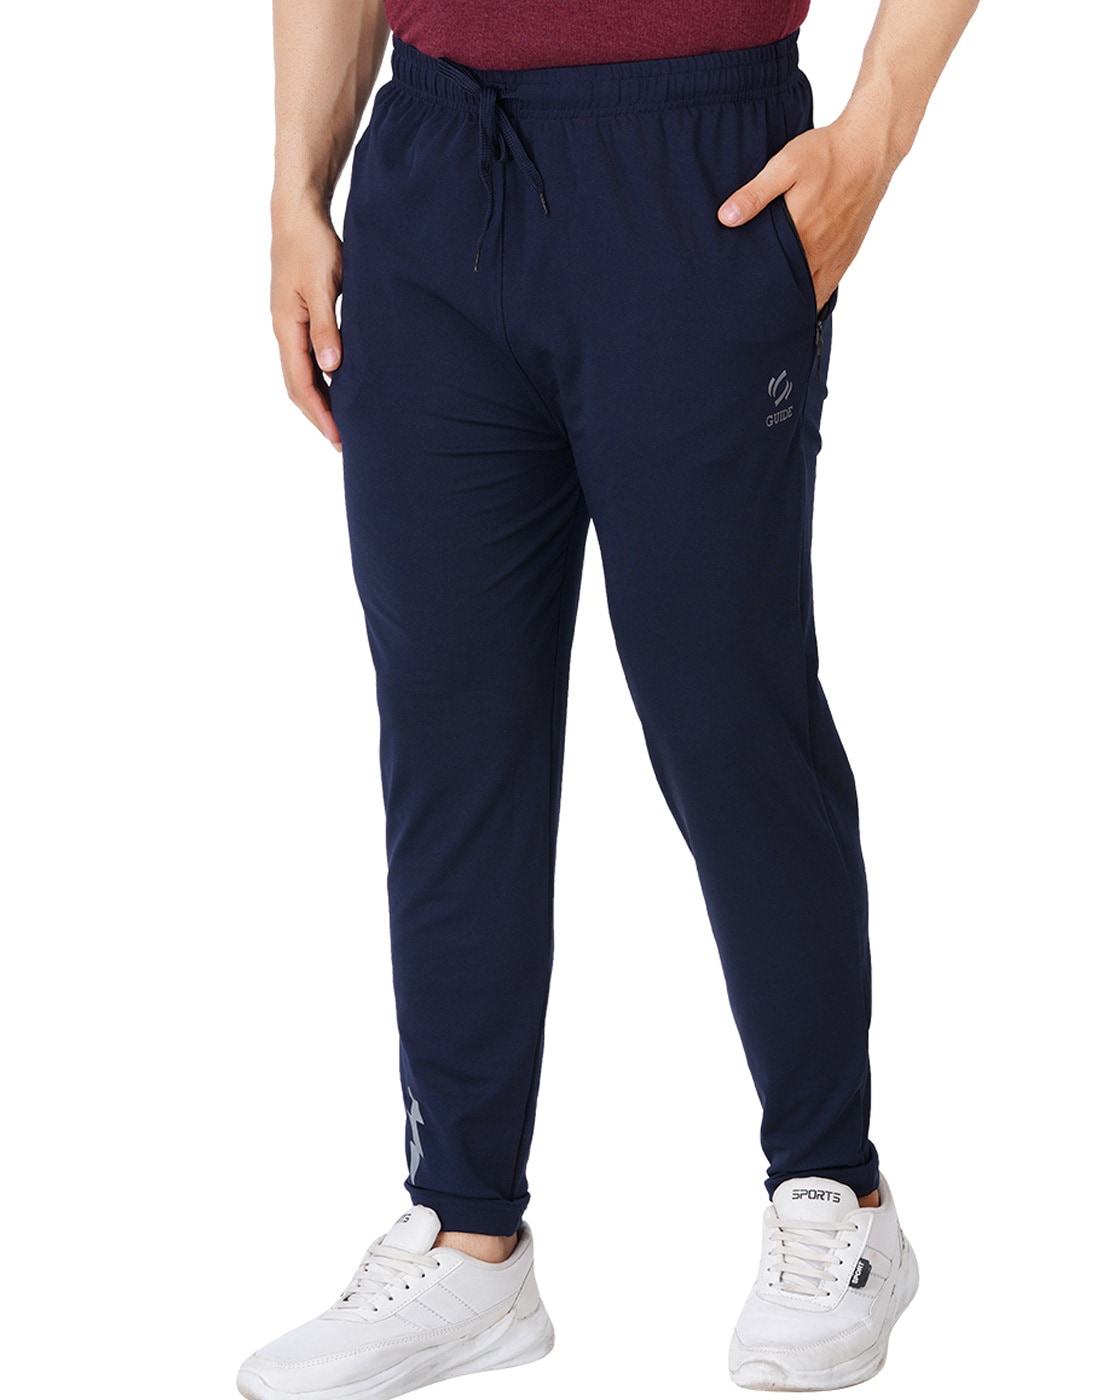 Buy Navy Track Pants for Men by GUIDE Online